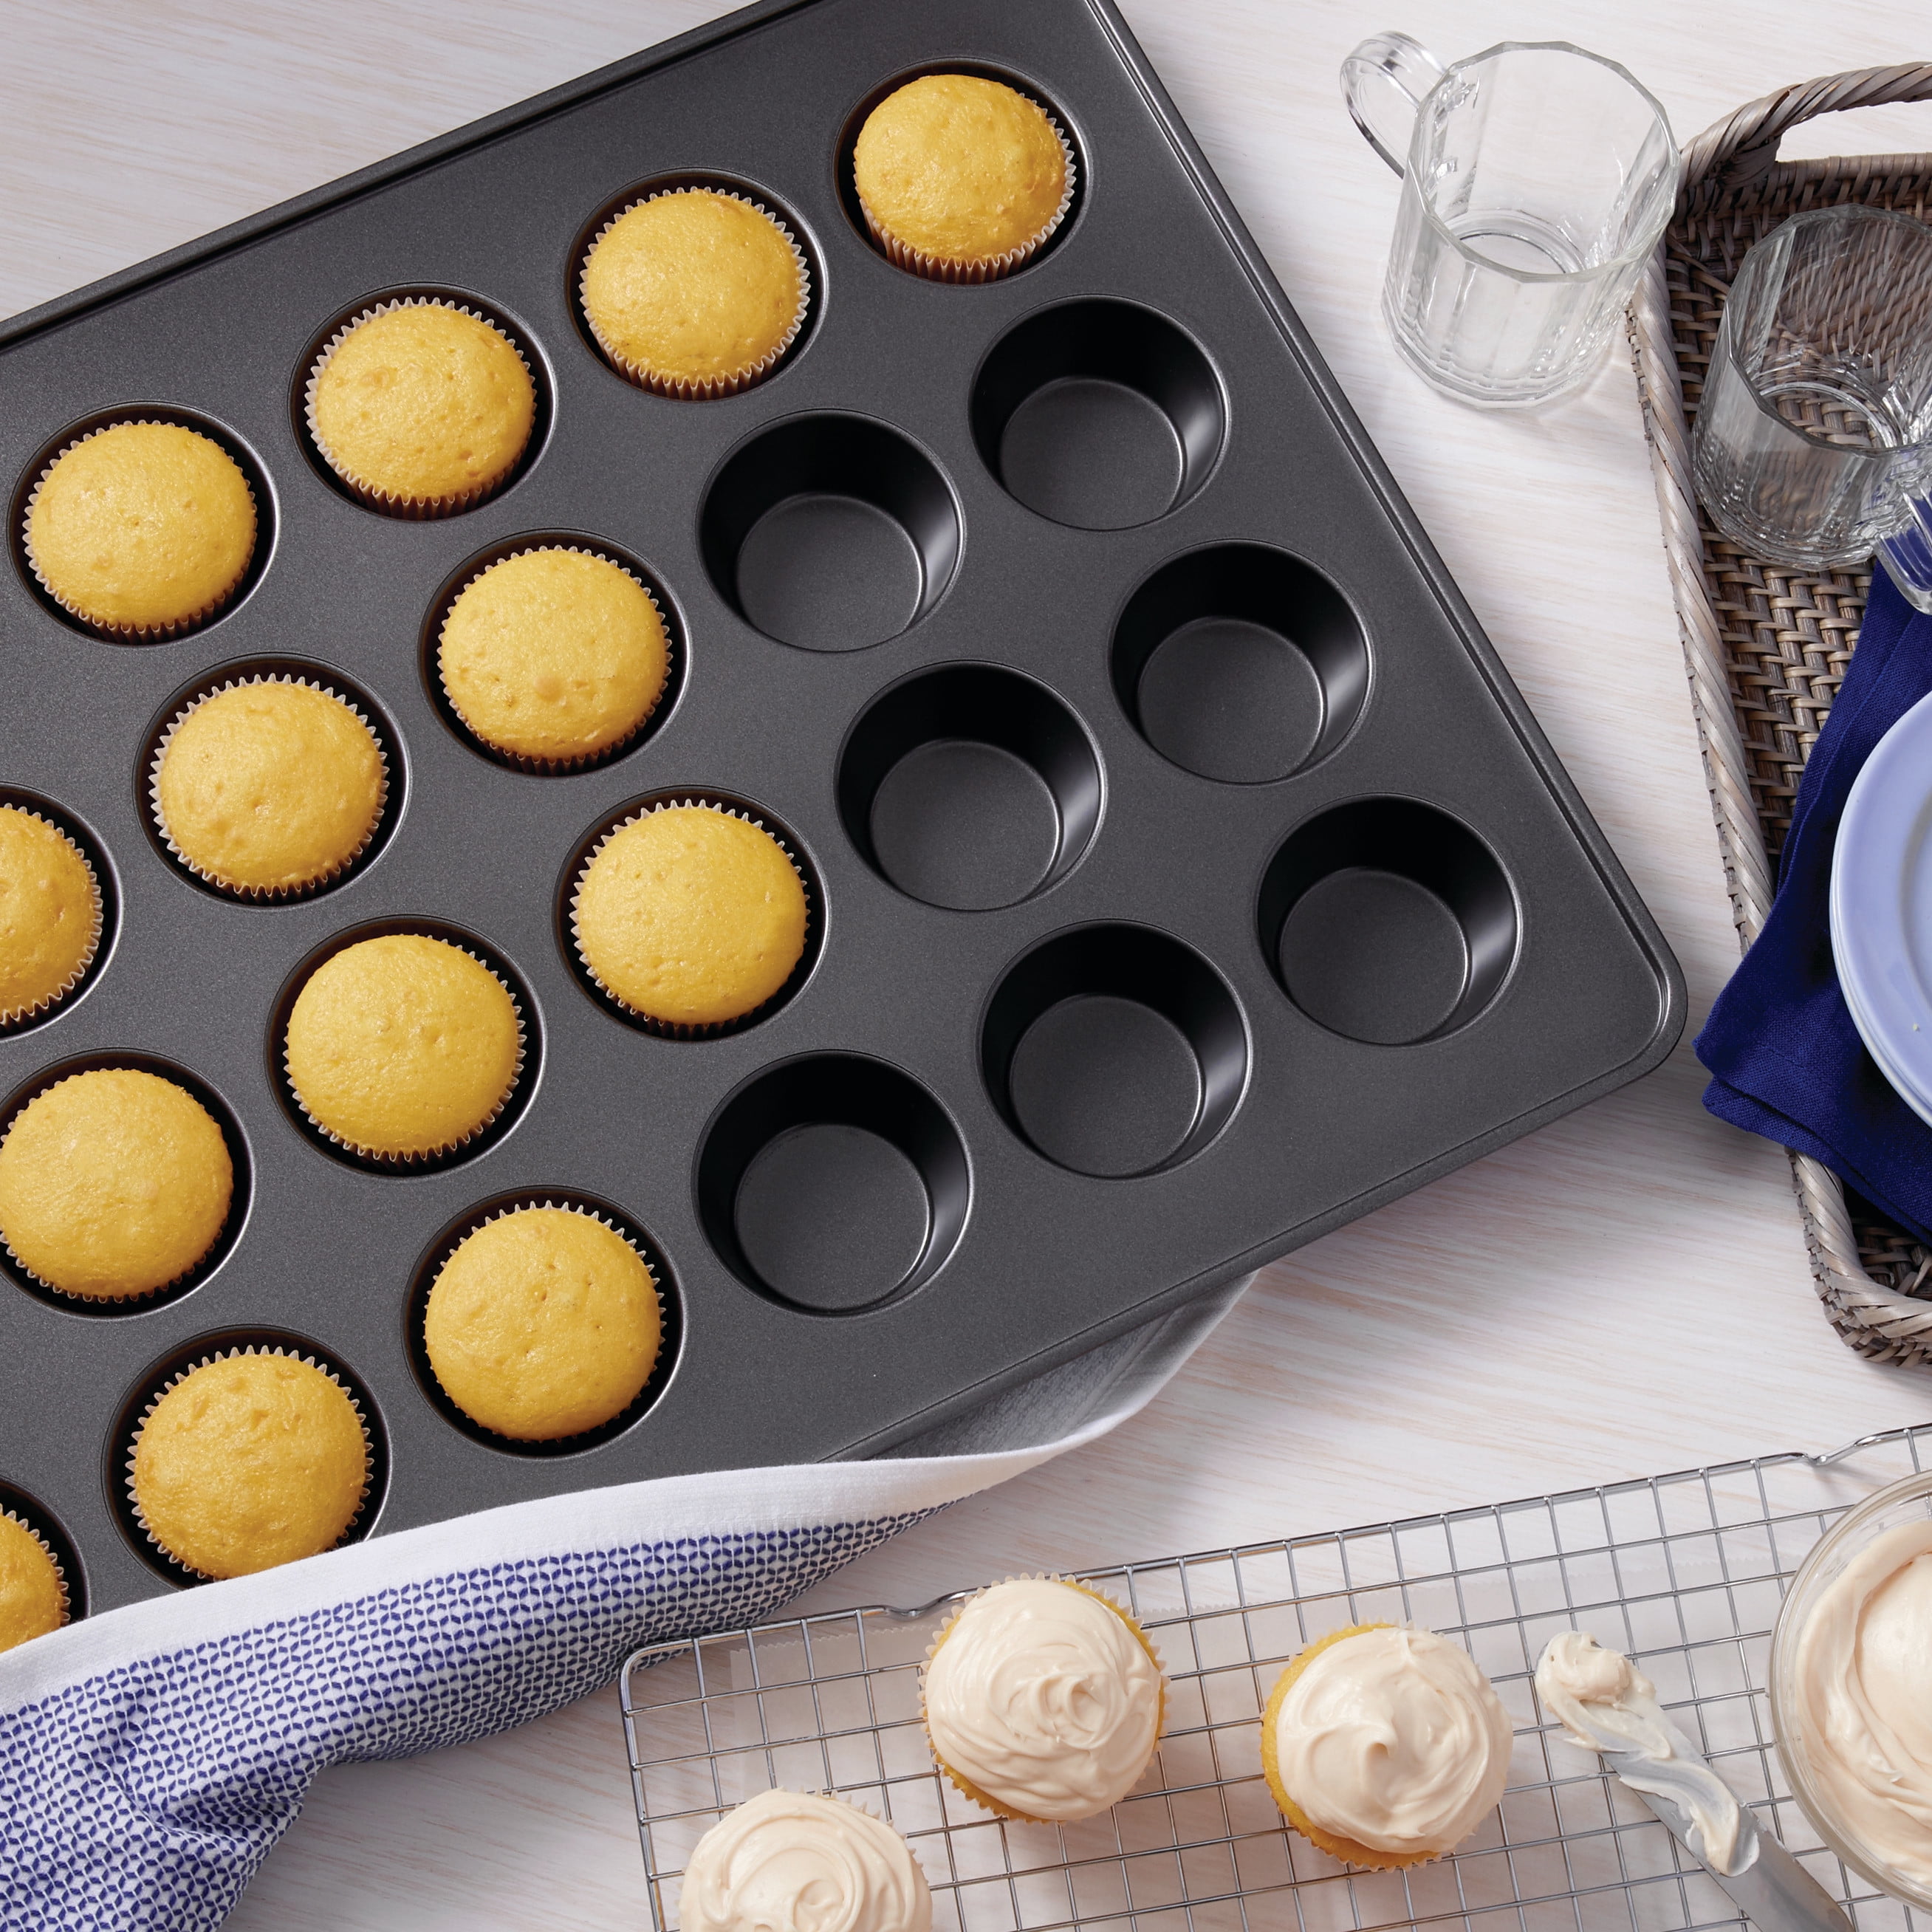 Wilton Perfect Results Premium Non-Stick Bakeware Muffin Pan & Cupcake Pan,  12-Cup, Steel and Easy Layers Sheet Cake Pan, 2-Piece Set, Rectangle Steel